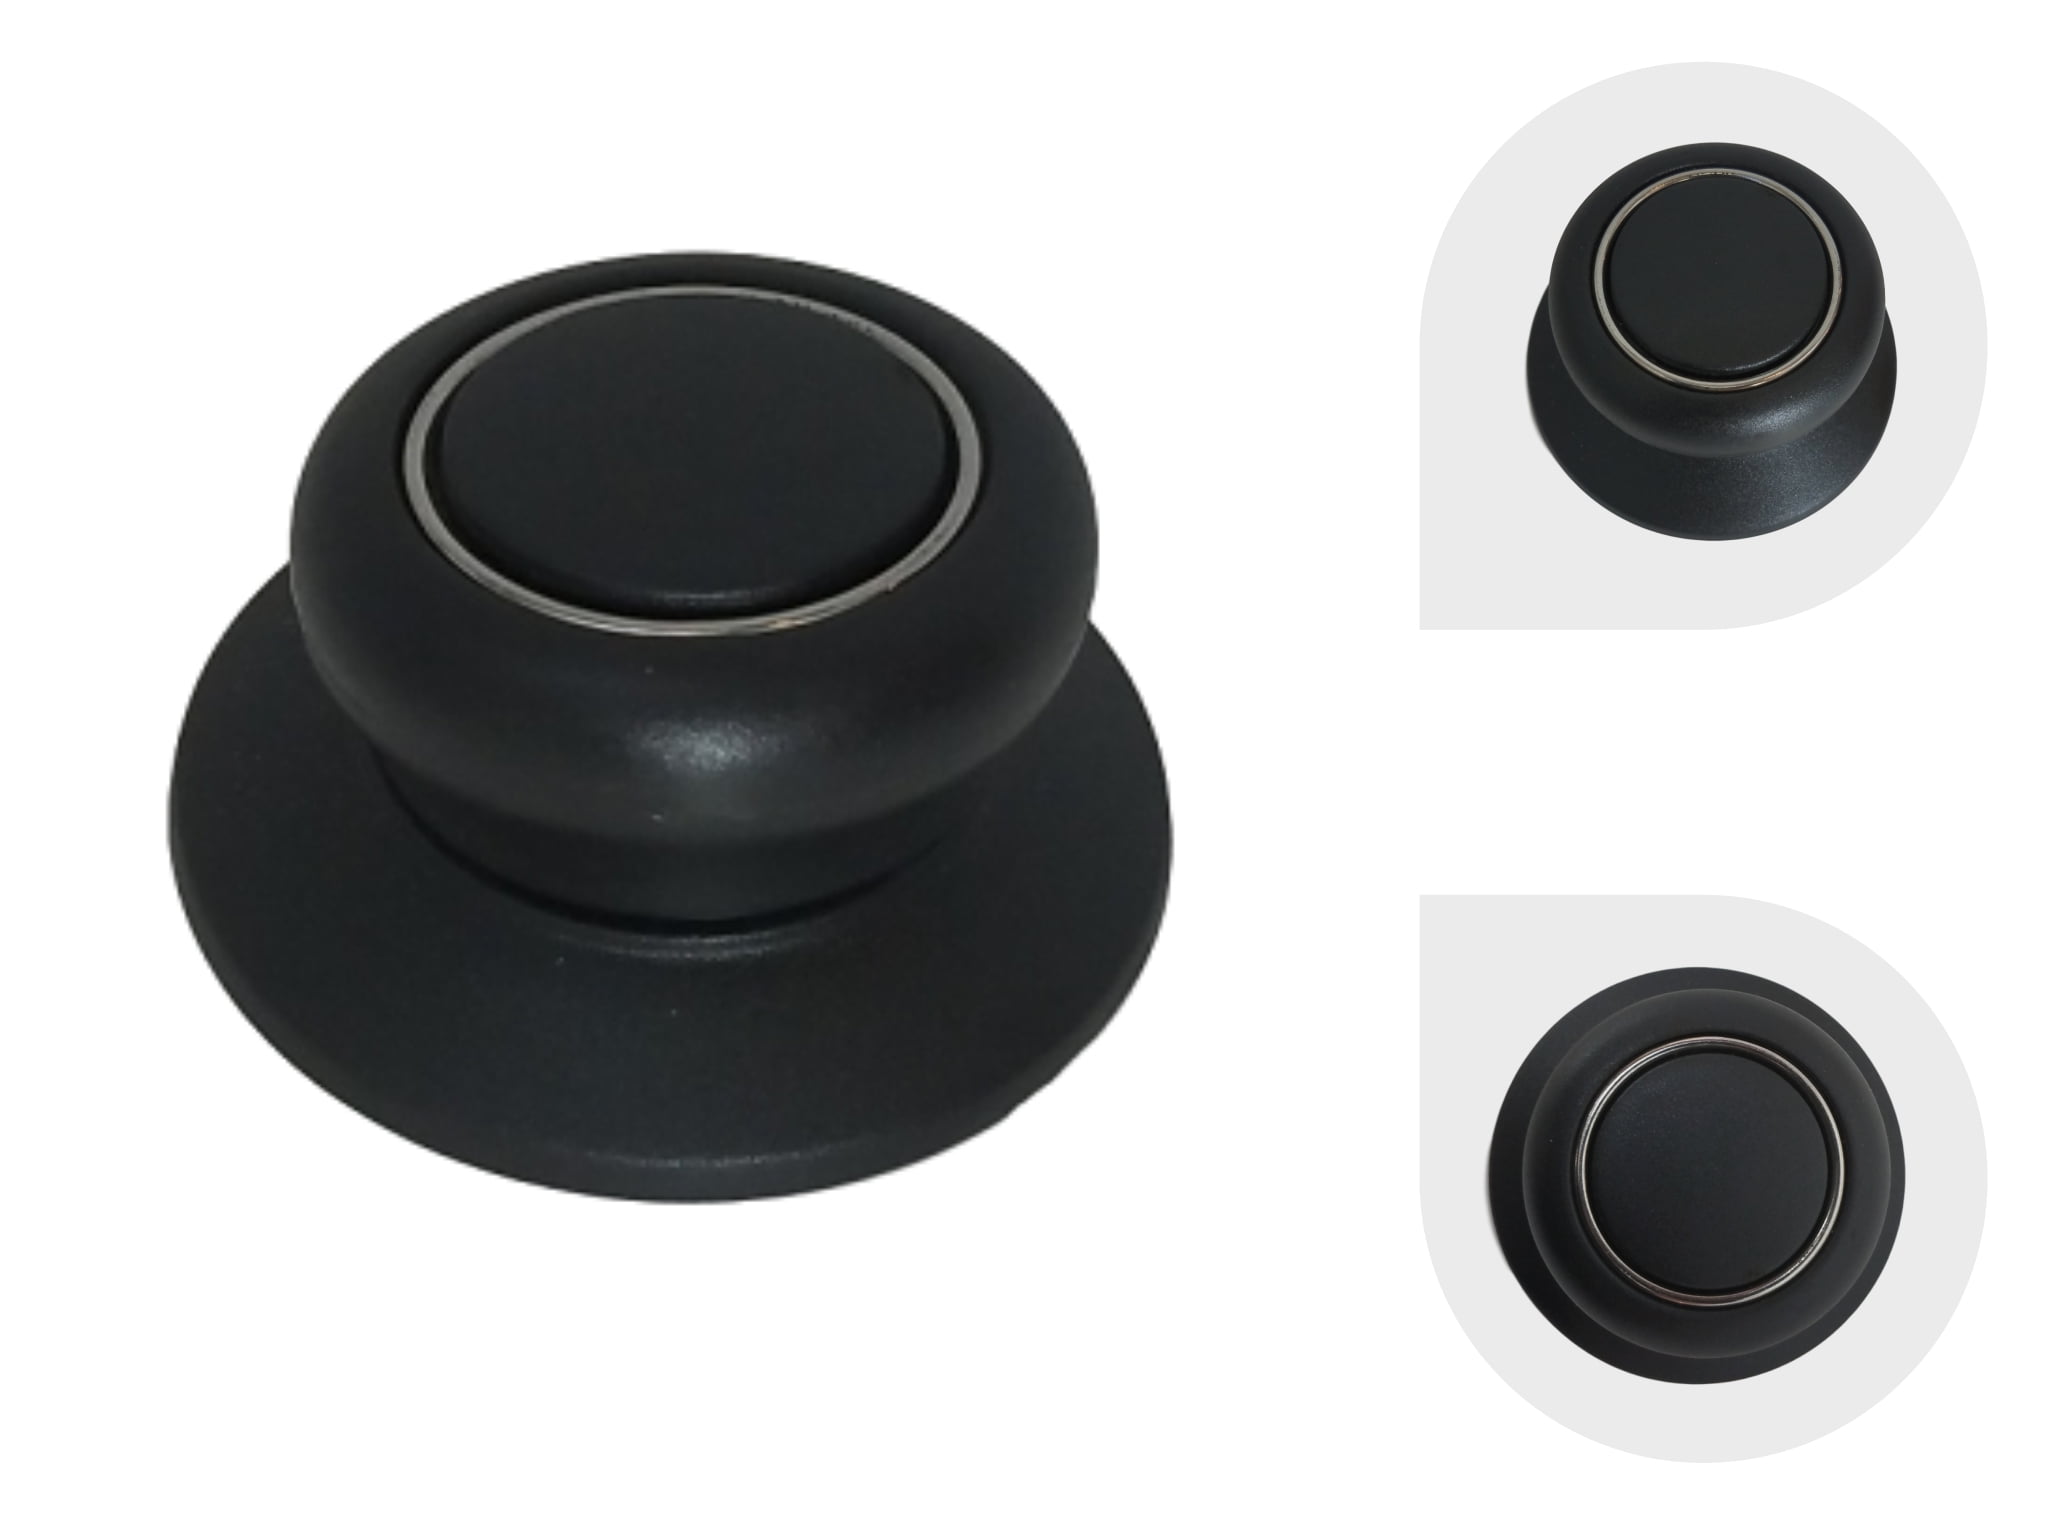 Universal Replacement Kitchen Cookware Pot Pan Lid M1F9 Knob Grip Cover W6I6